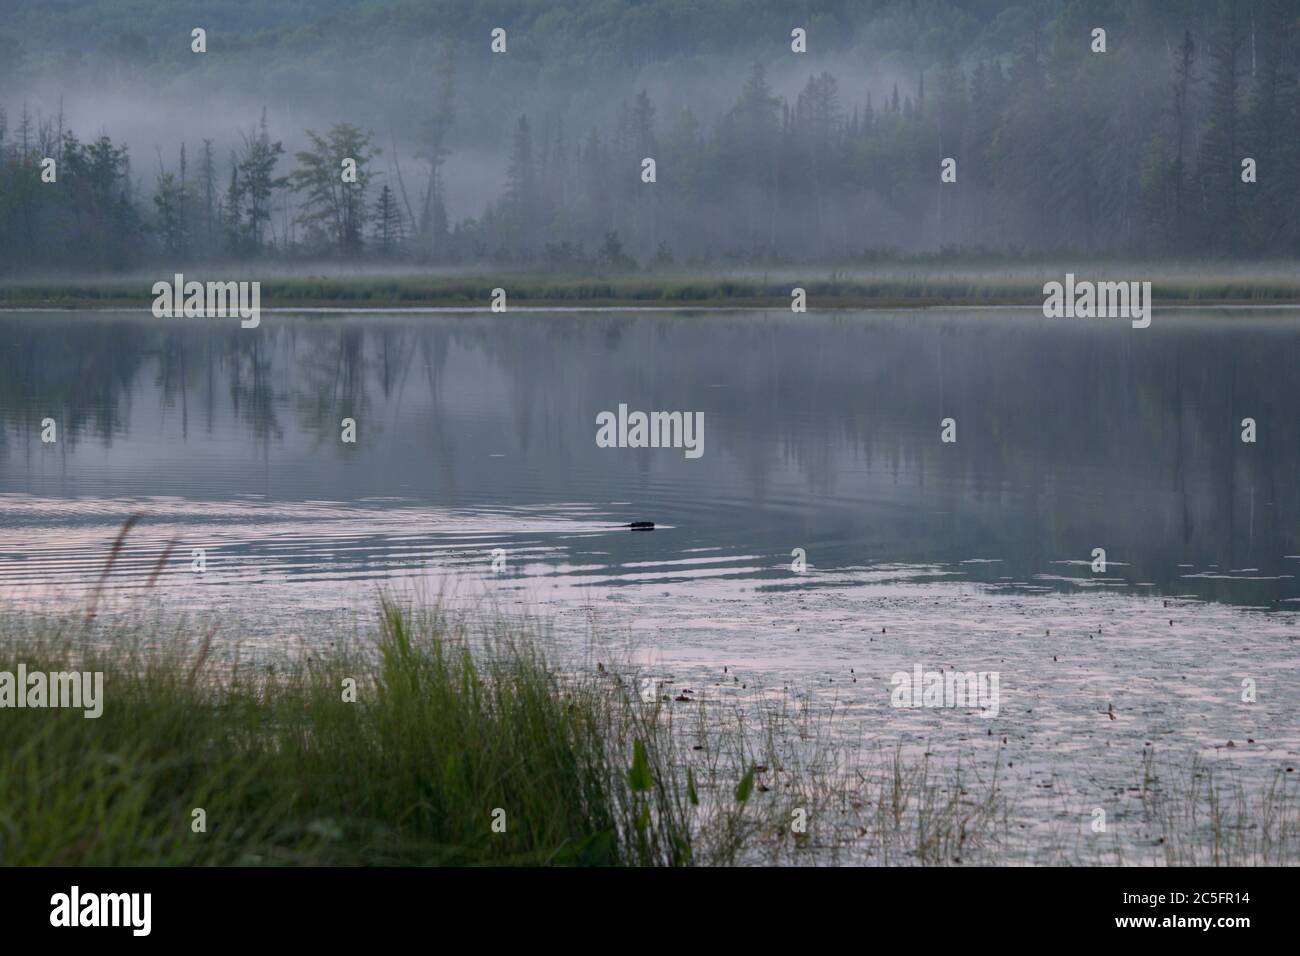 Beaver swimming in water on foggy morning Stock Photo